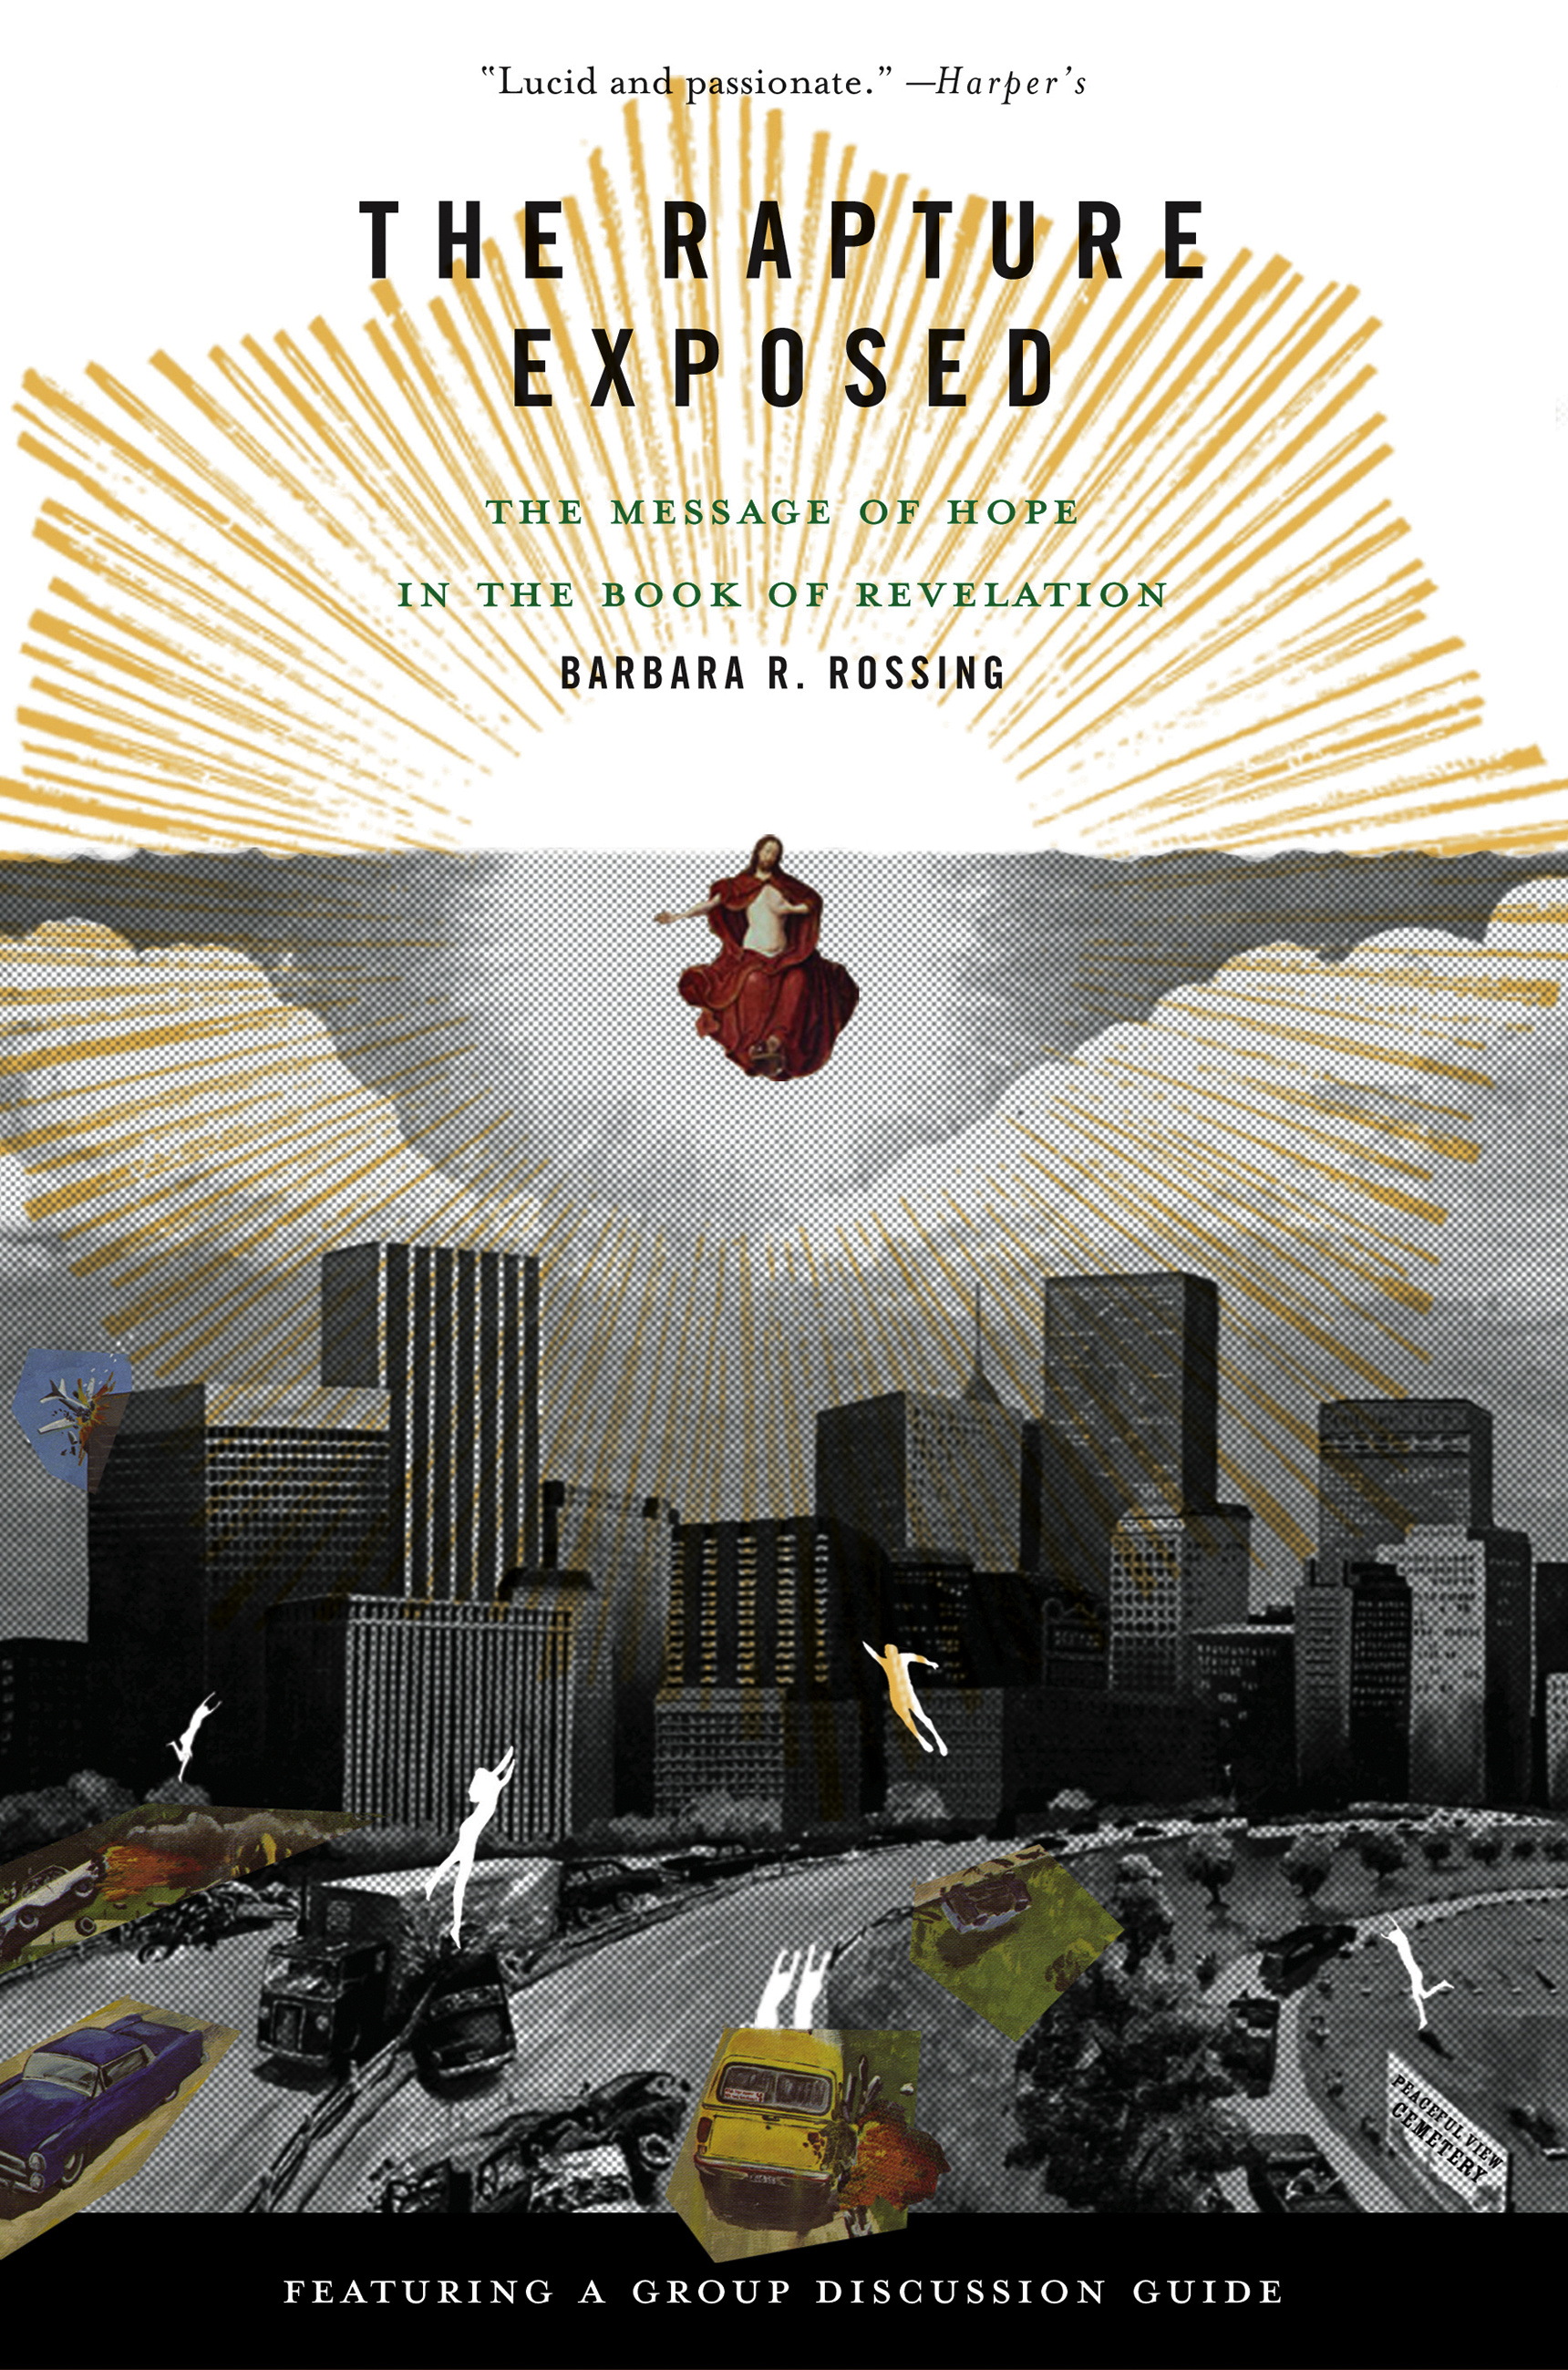 The Rapture Exposed by Barbara R. Rossing | Basic Books